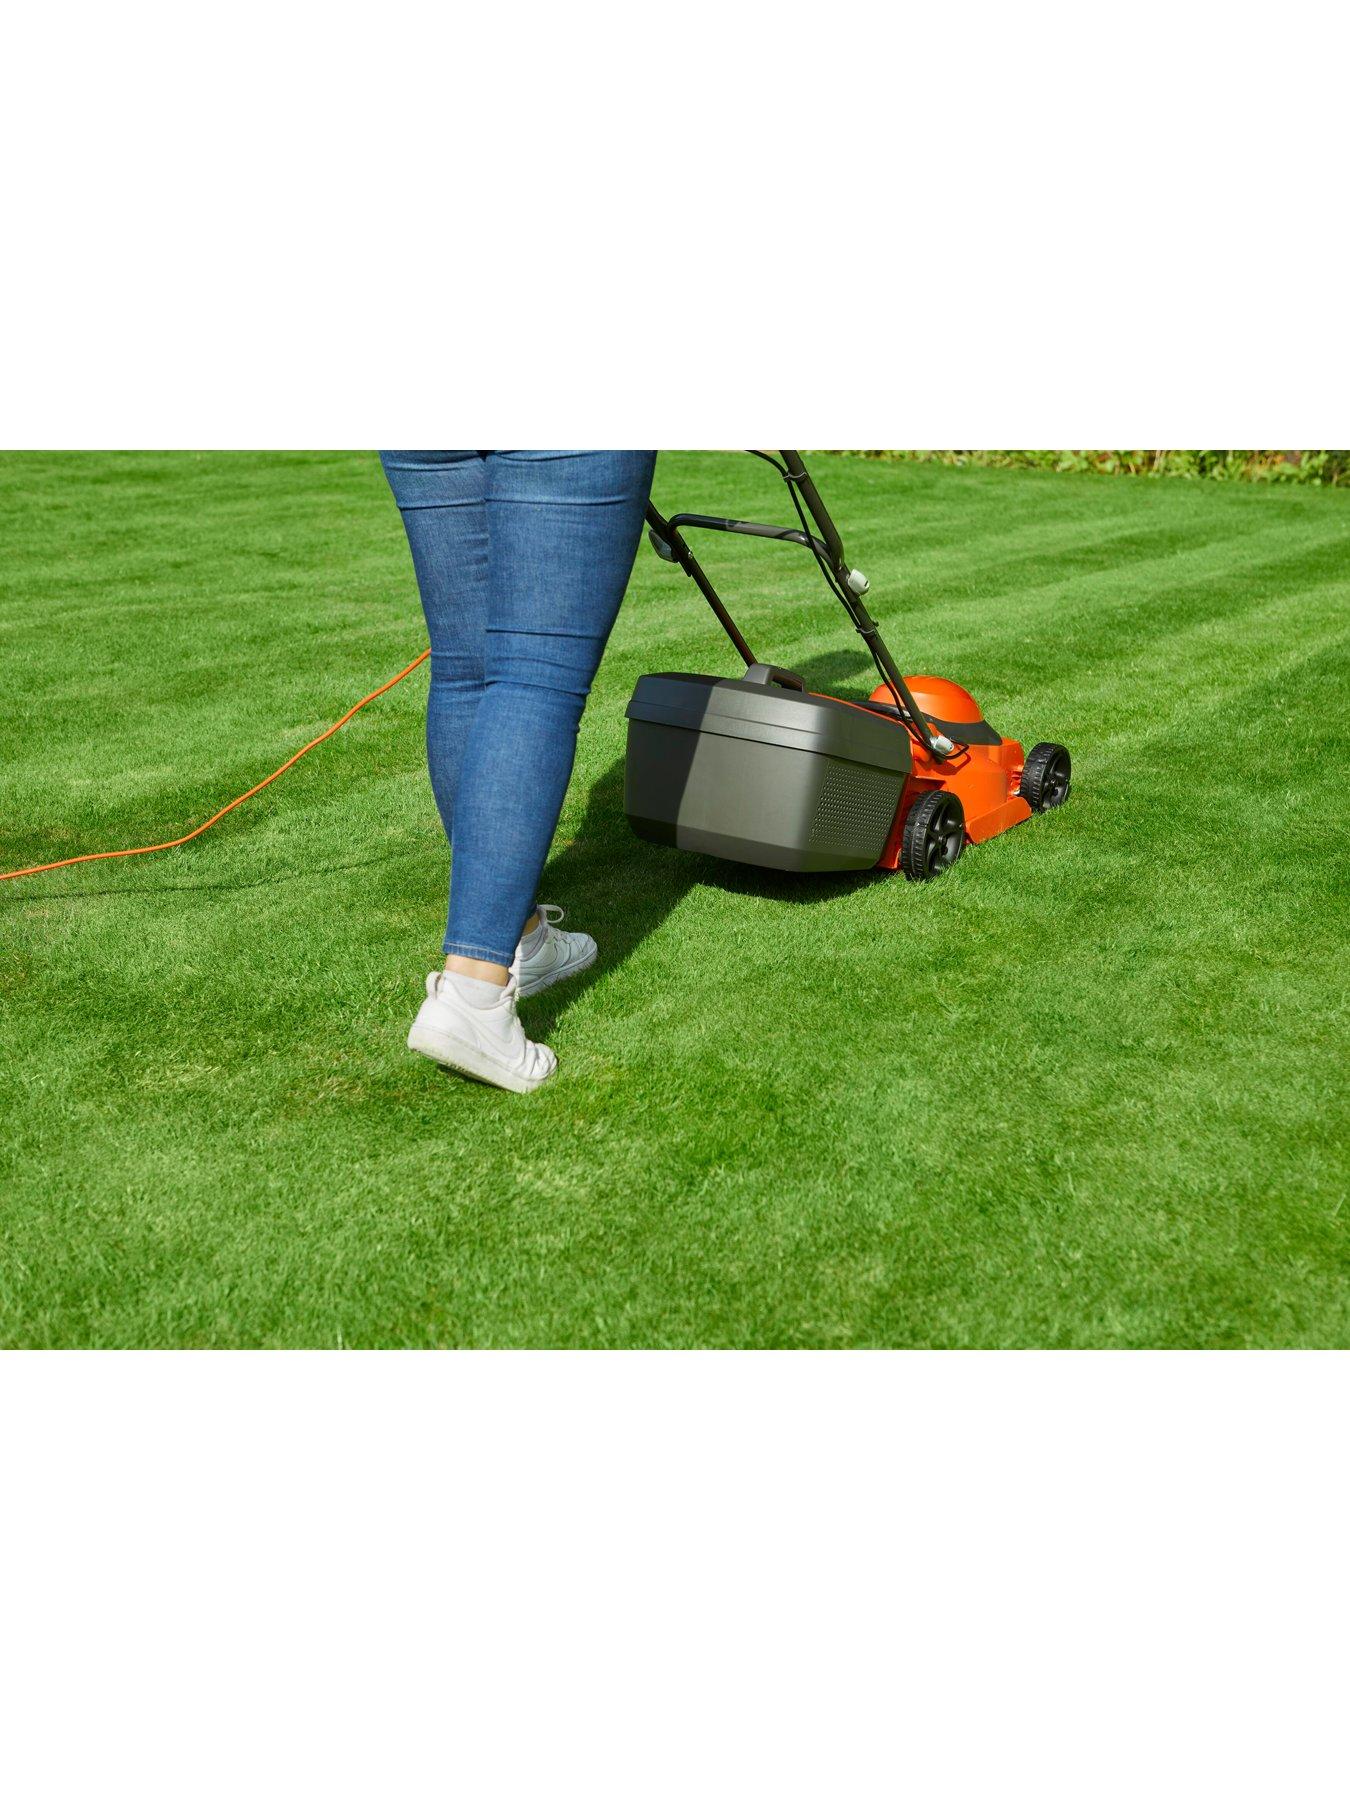 Flymo EasiMow 300R Corded Rotary Lawnmower & Mini Trim Corded Grass Trimmer  Kit